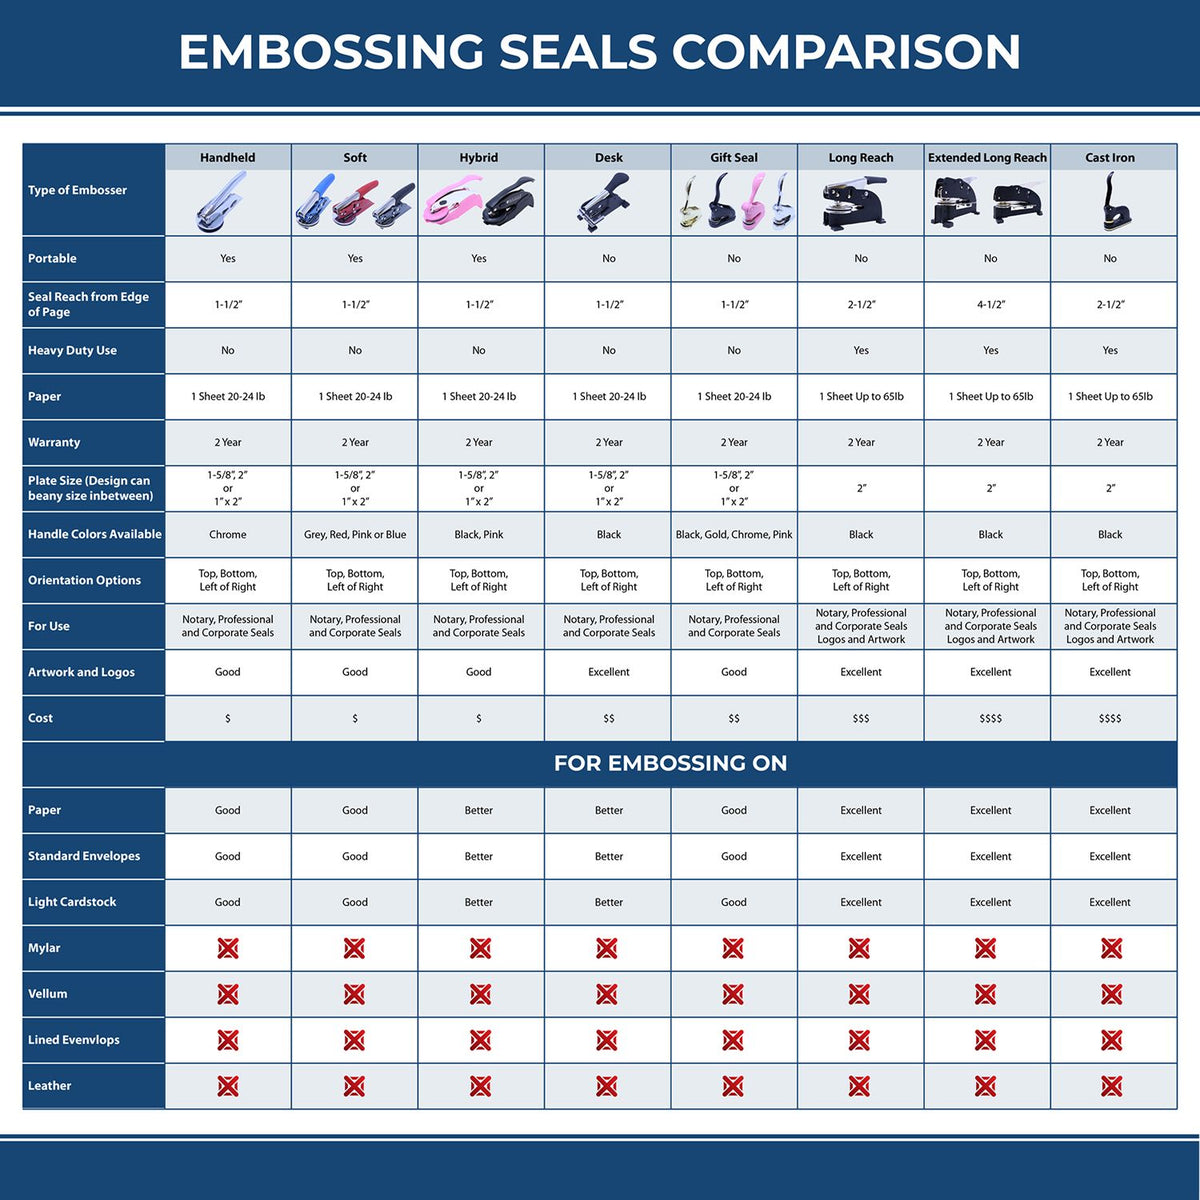 A comparison chart for the different types of mount models available for the Hybrid Utah Geologist Seal